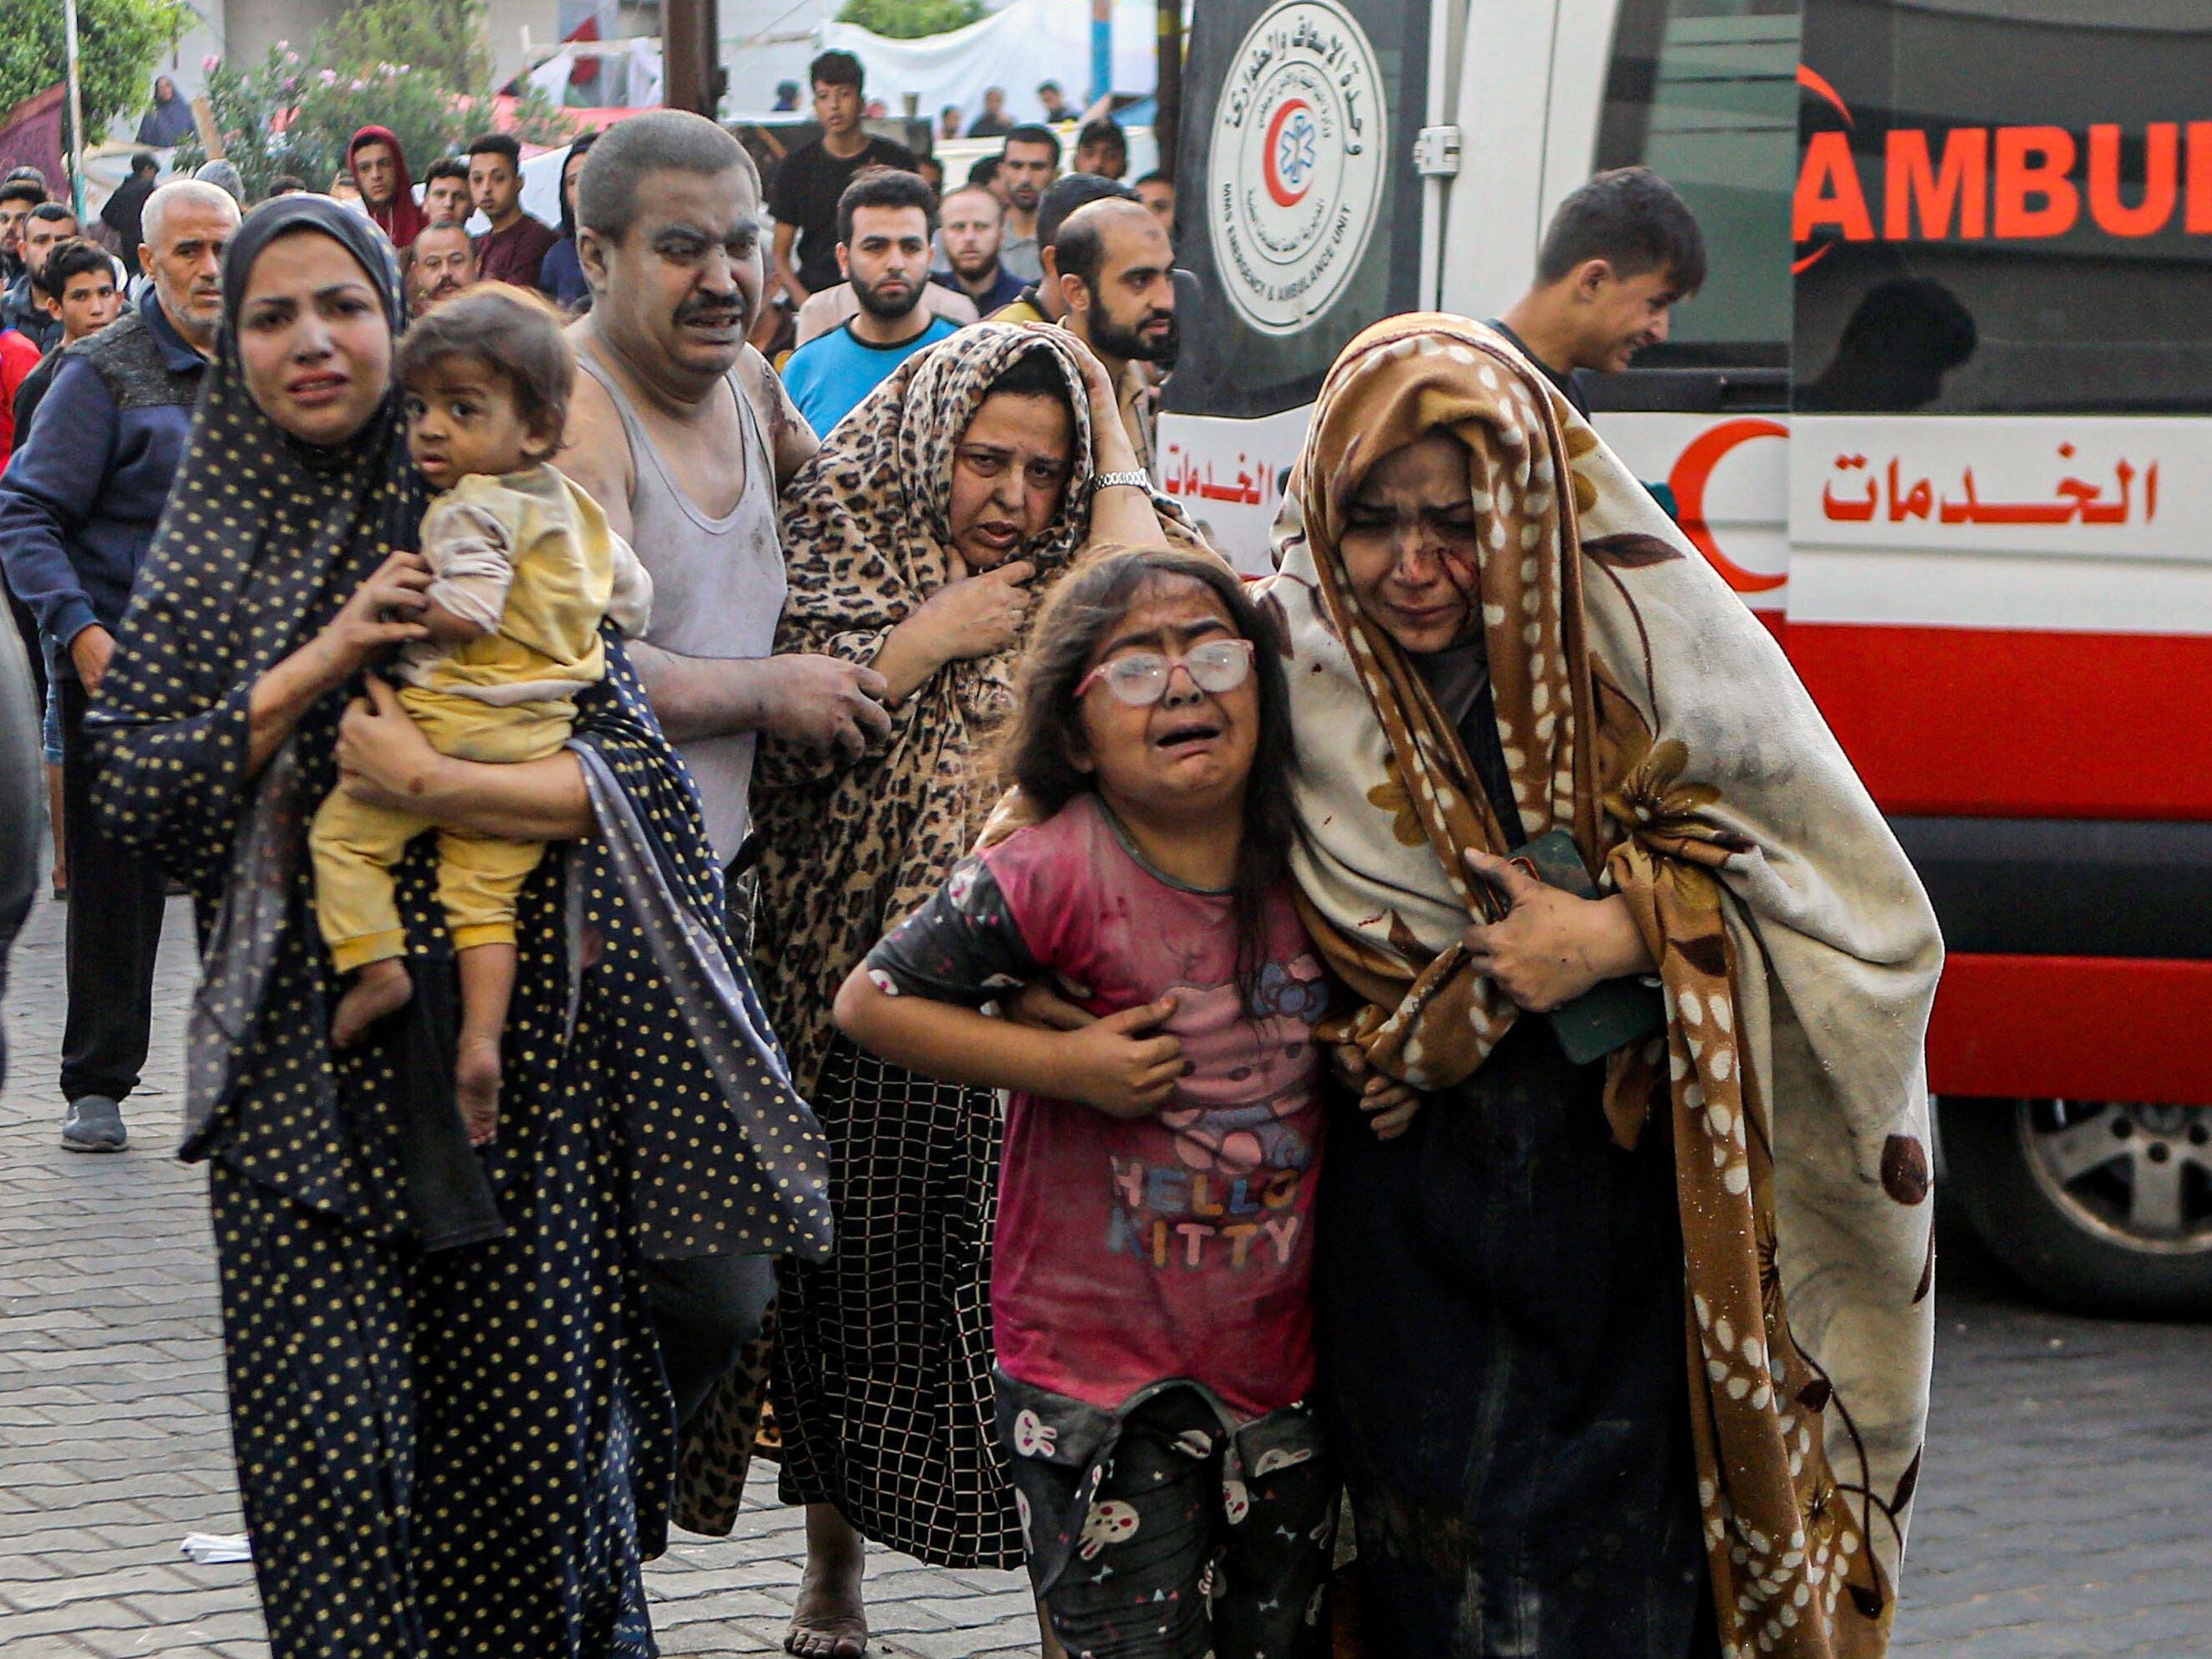 Shifa Hospital patients and staff leave the compound, Gaza health officials say